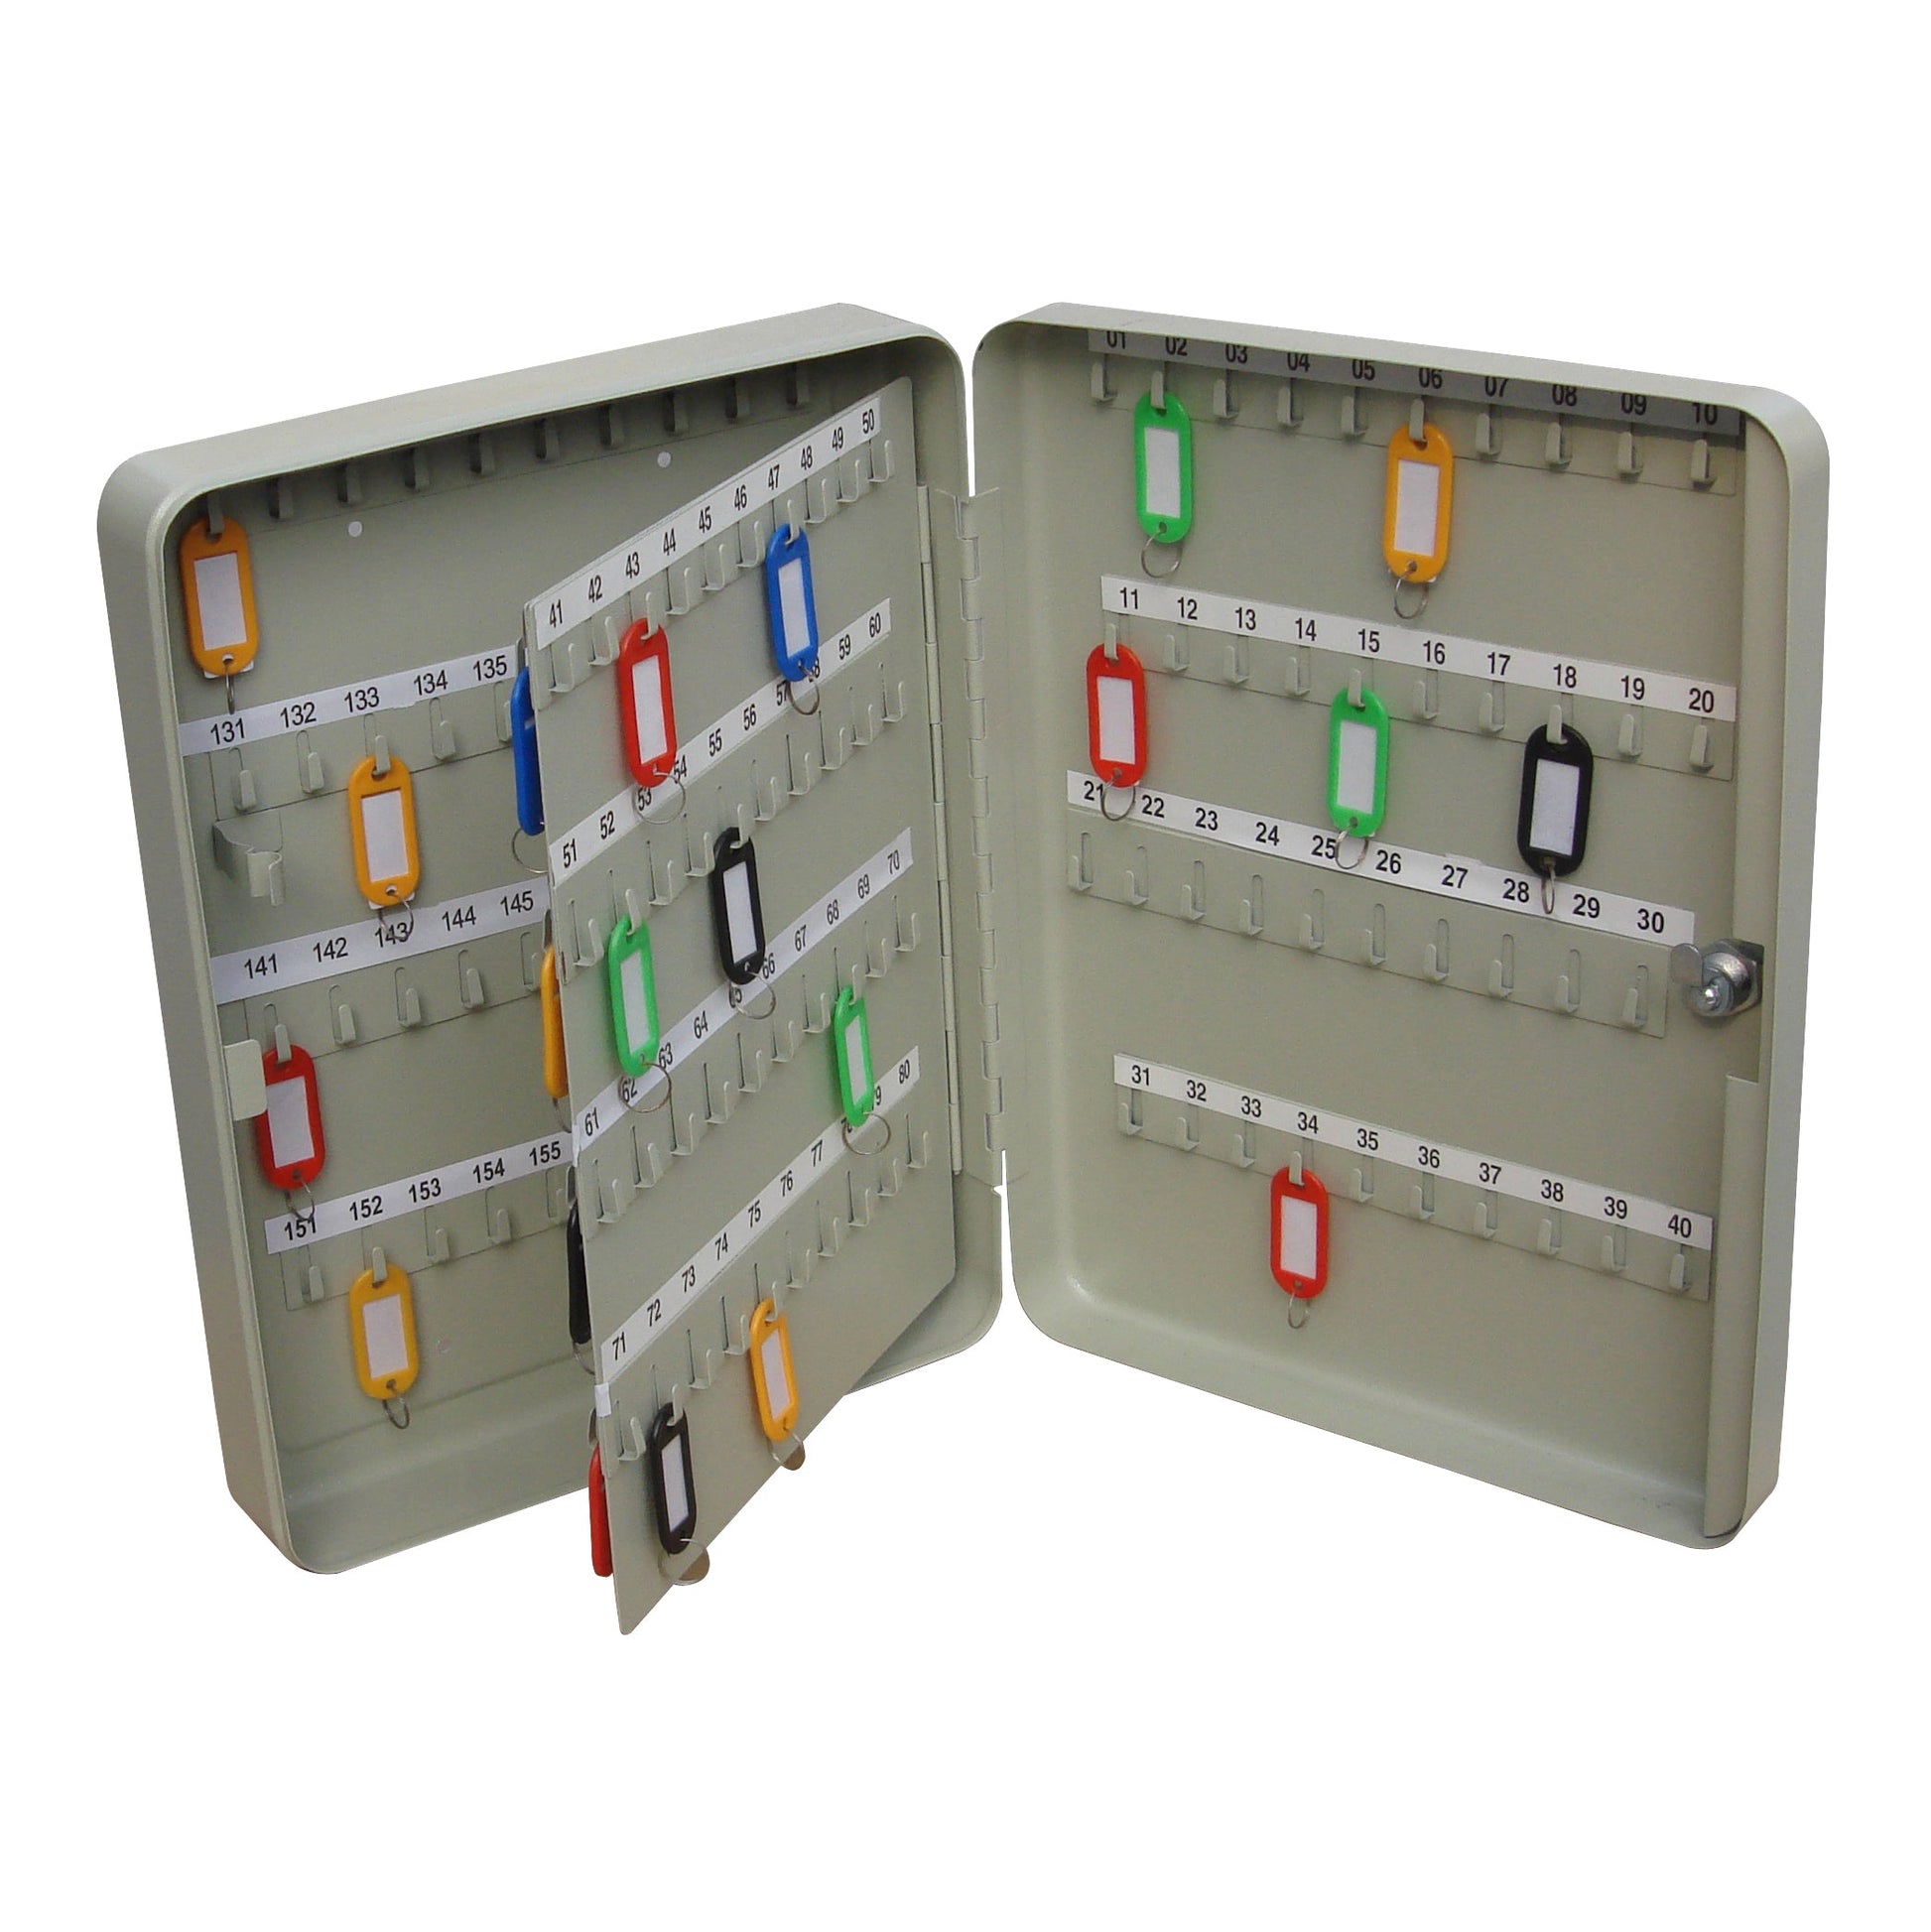 An open beige key cabinet with numbered hooks and colored key tags. The cabinet displays a range of key slots, each marked with a number from 1 to 160, indicating a structured key management system. The various colored tags attached to the keys assist with quick identification.